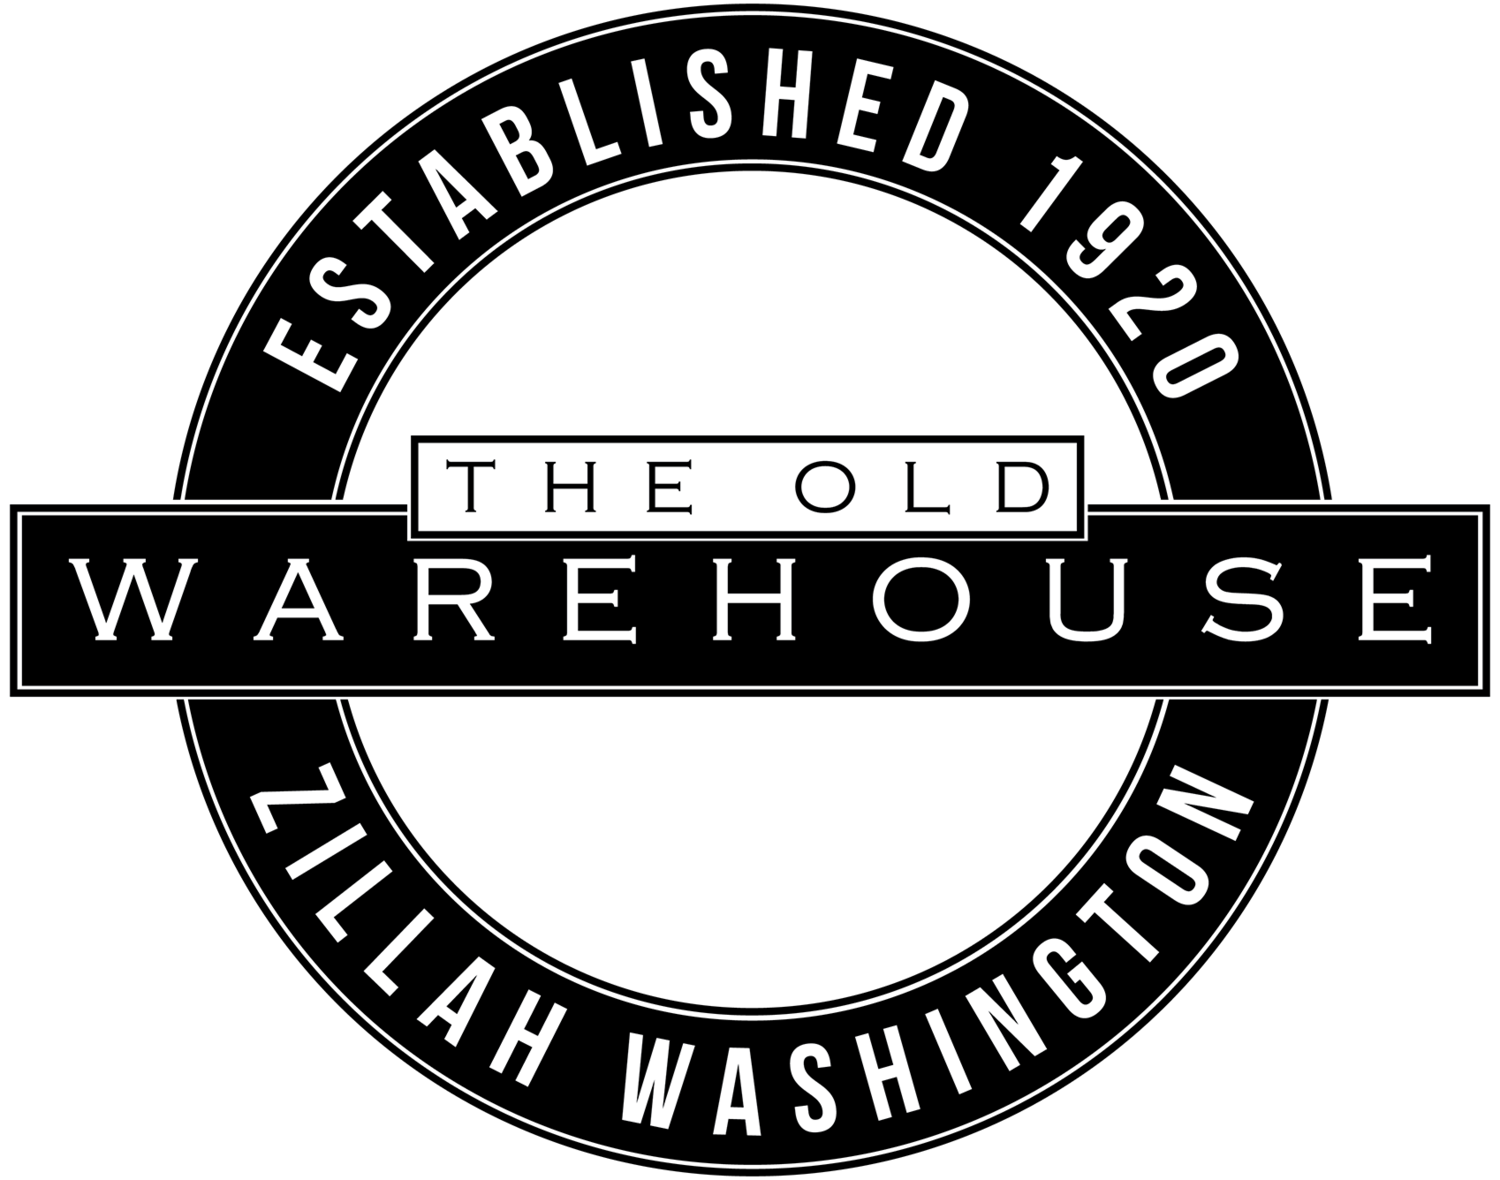 The Old Warehouse in Zillah